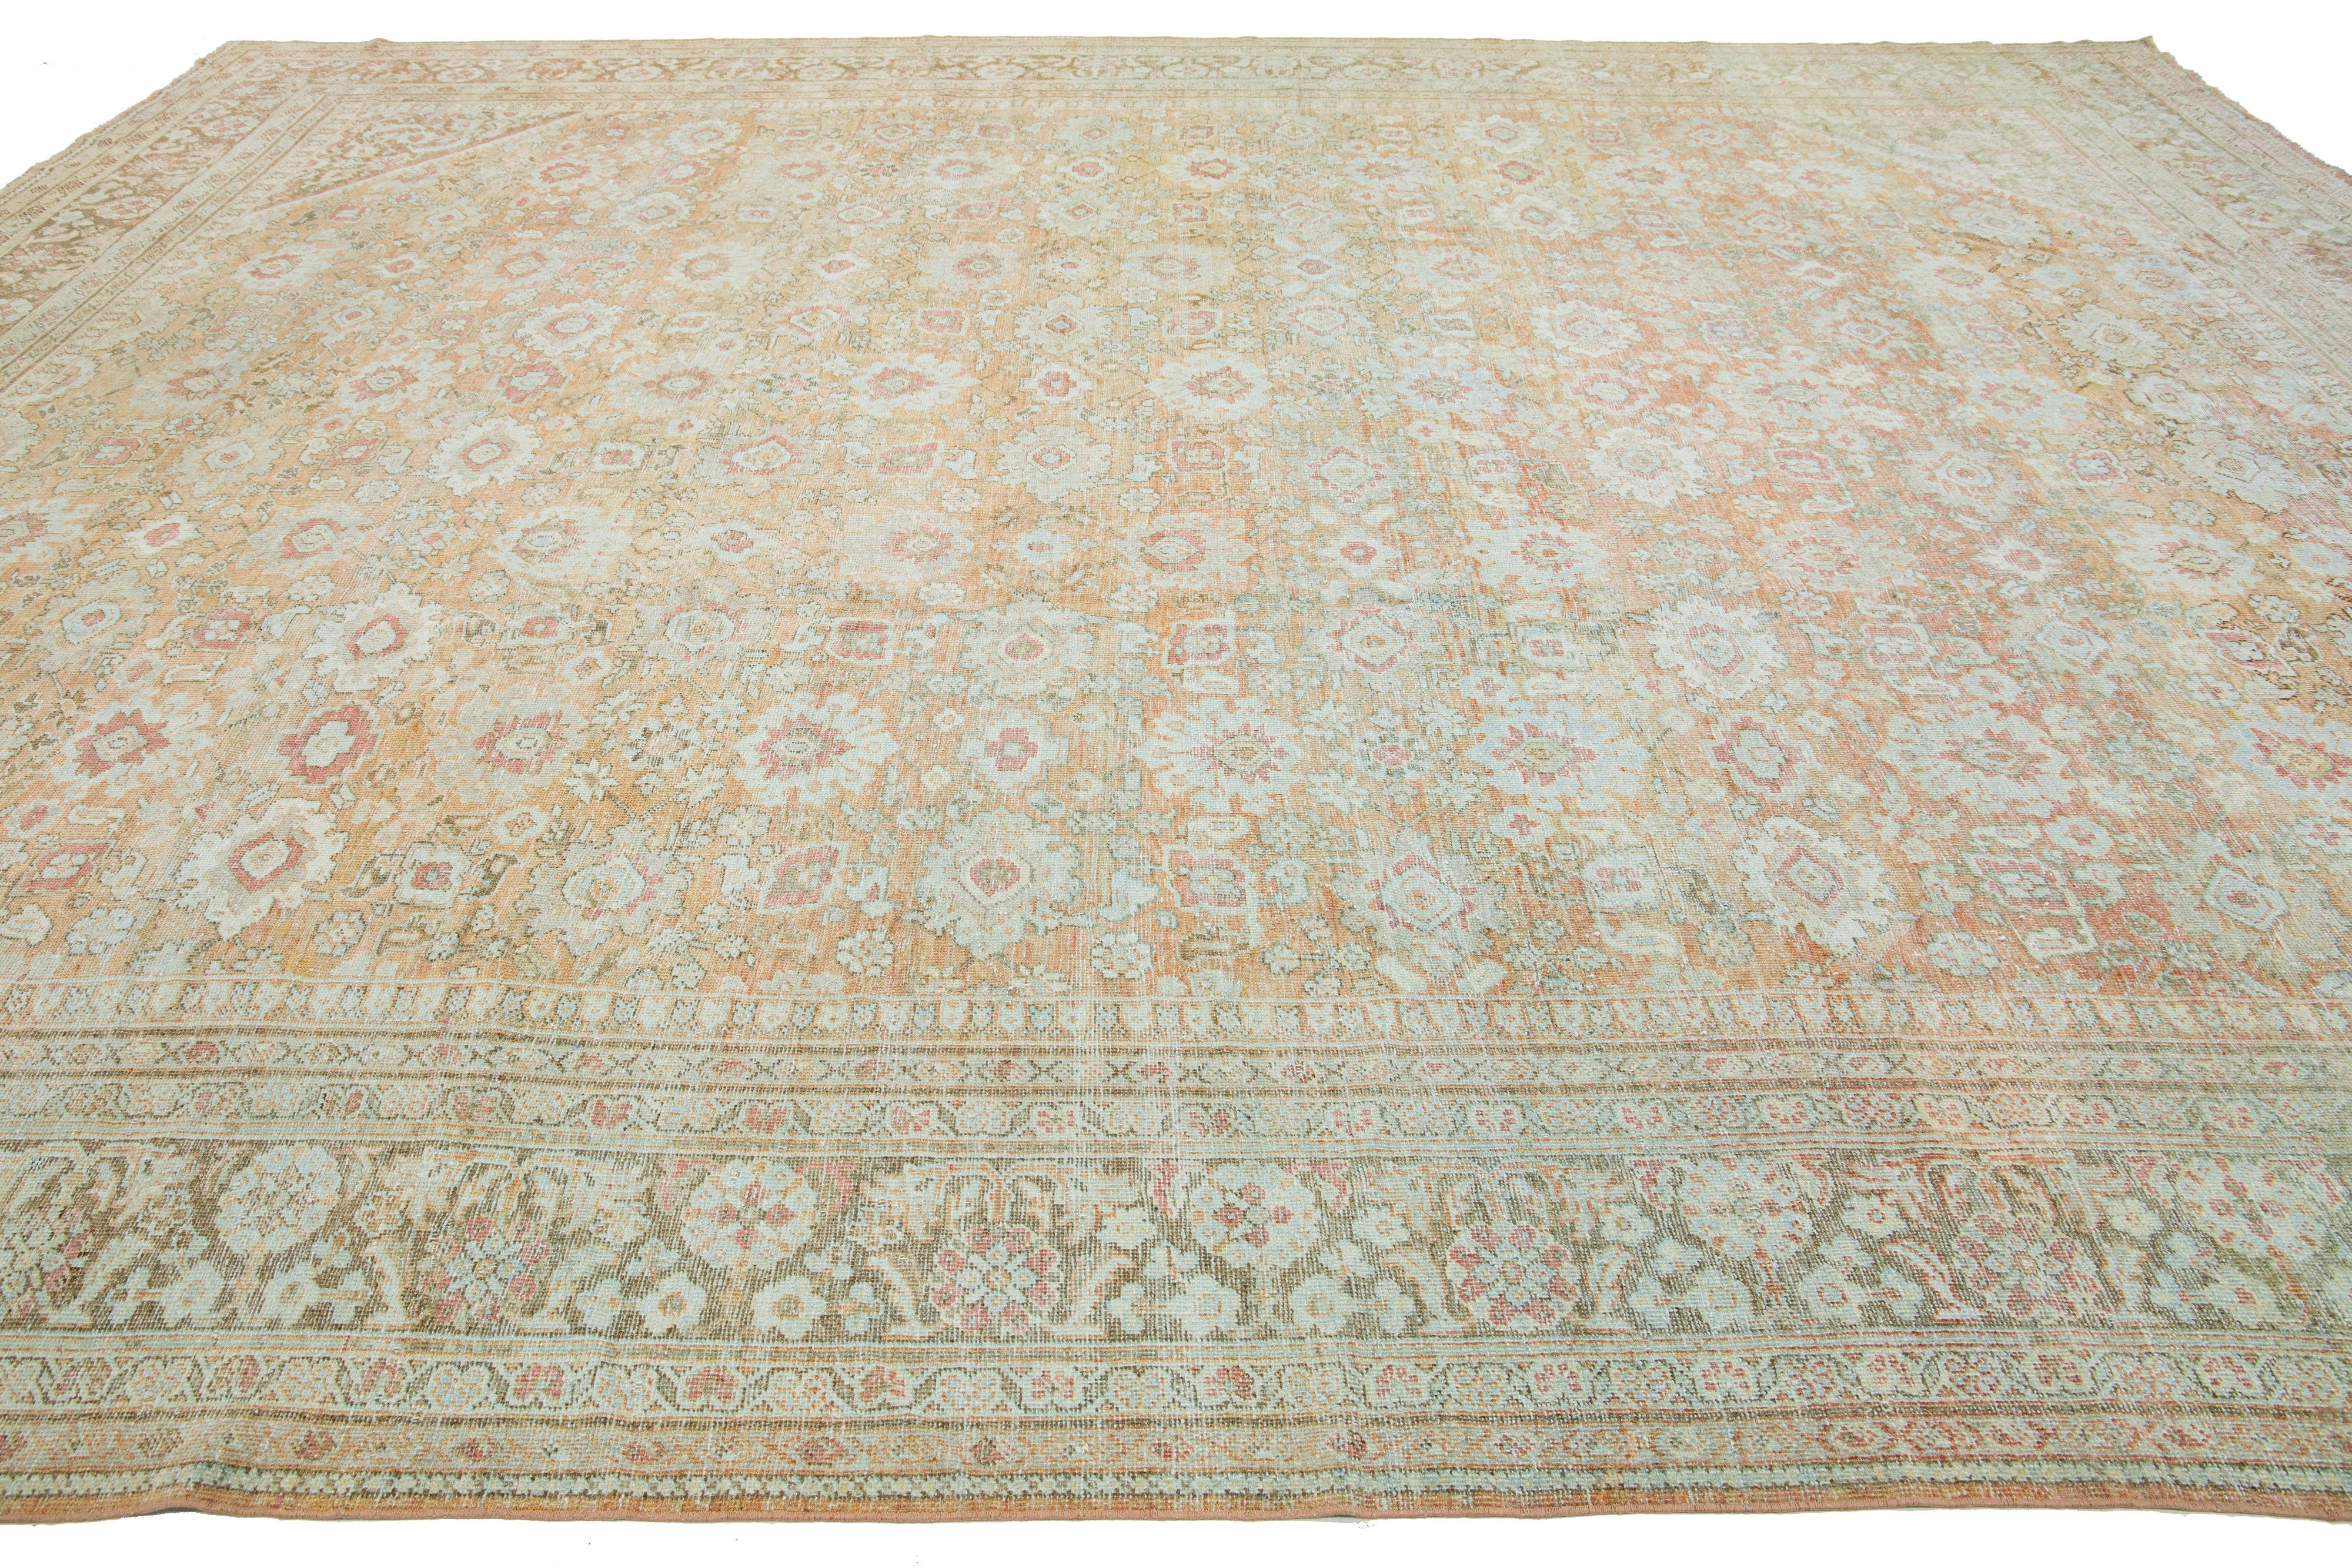 Vintage Persian Mahal Orange Wool Rug Handmade With Allover Motif In Good Condition For Sale In Norwalk, CT